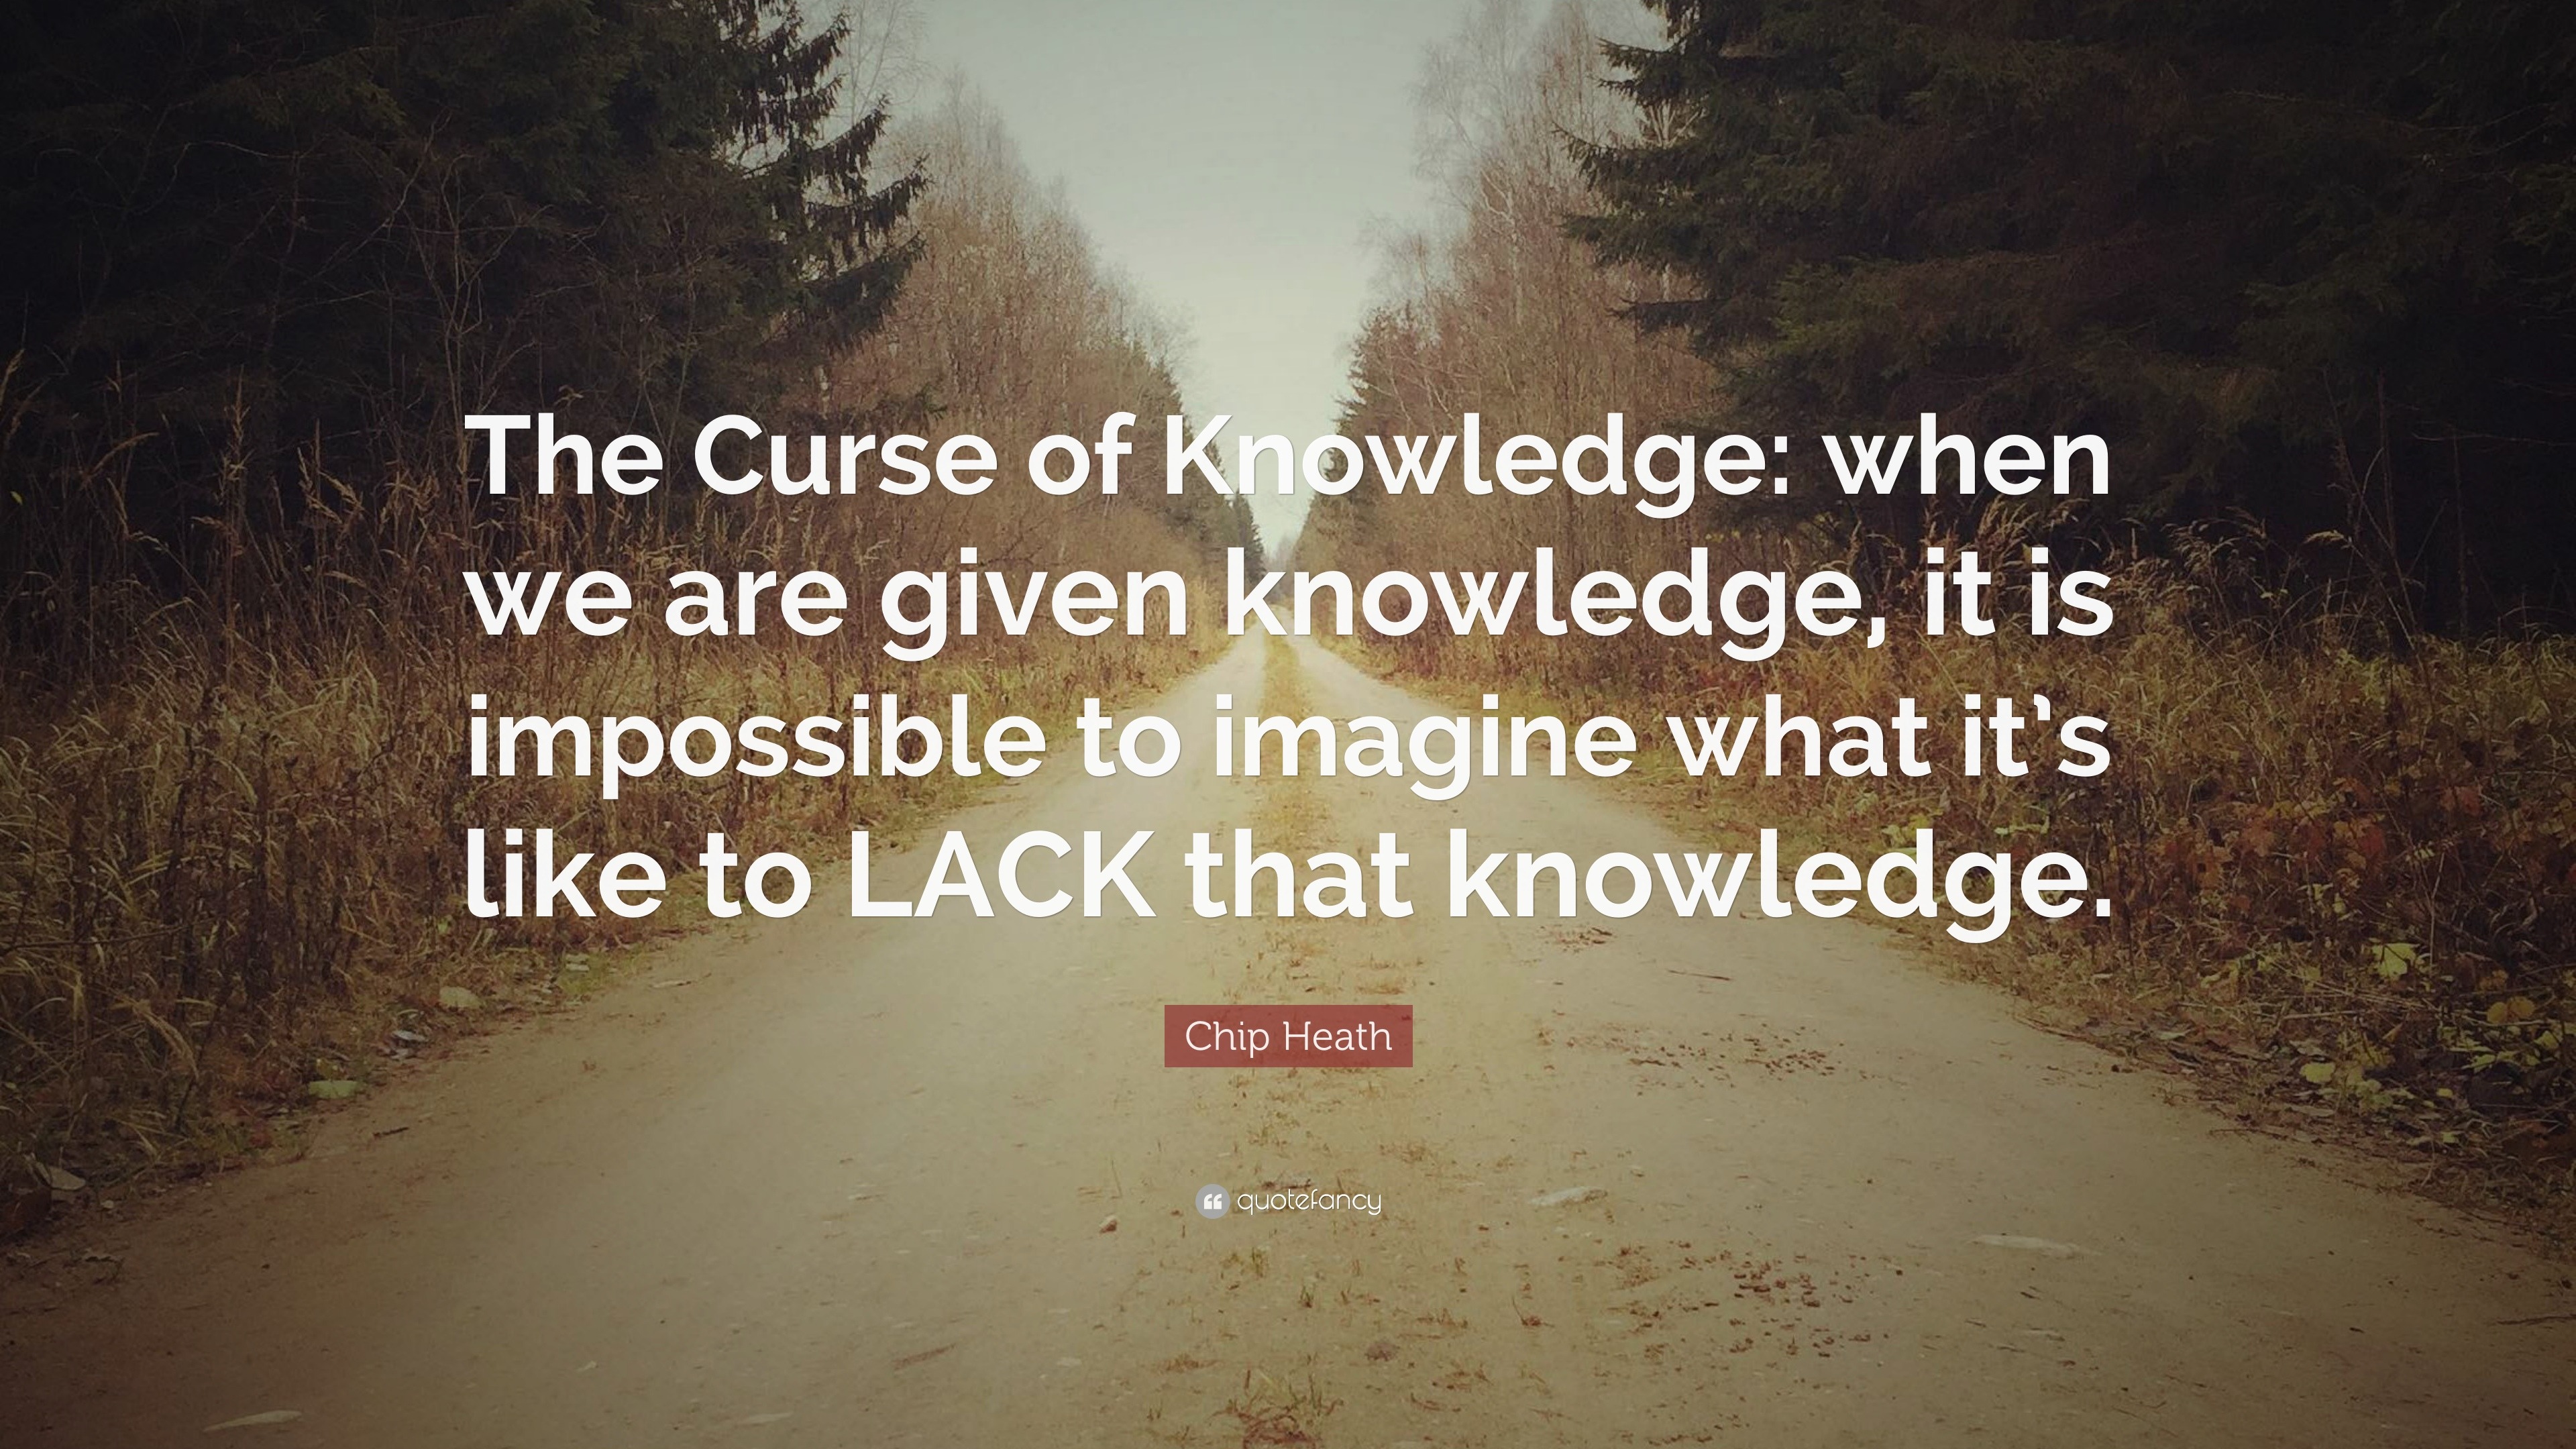 Chip Heath Quote: “The Curse of Knowledge: when we are given knowledge ...